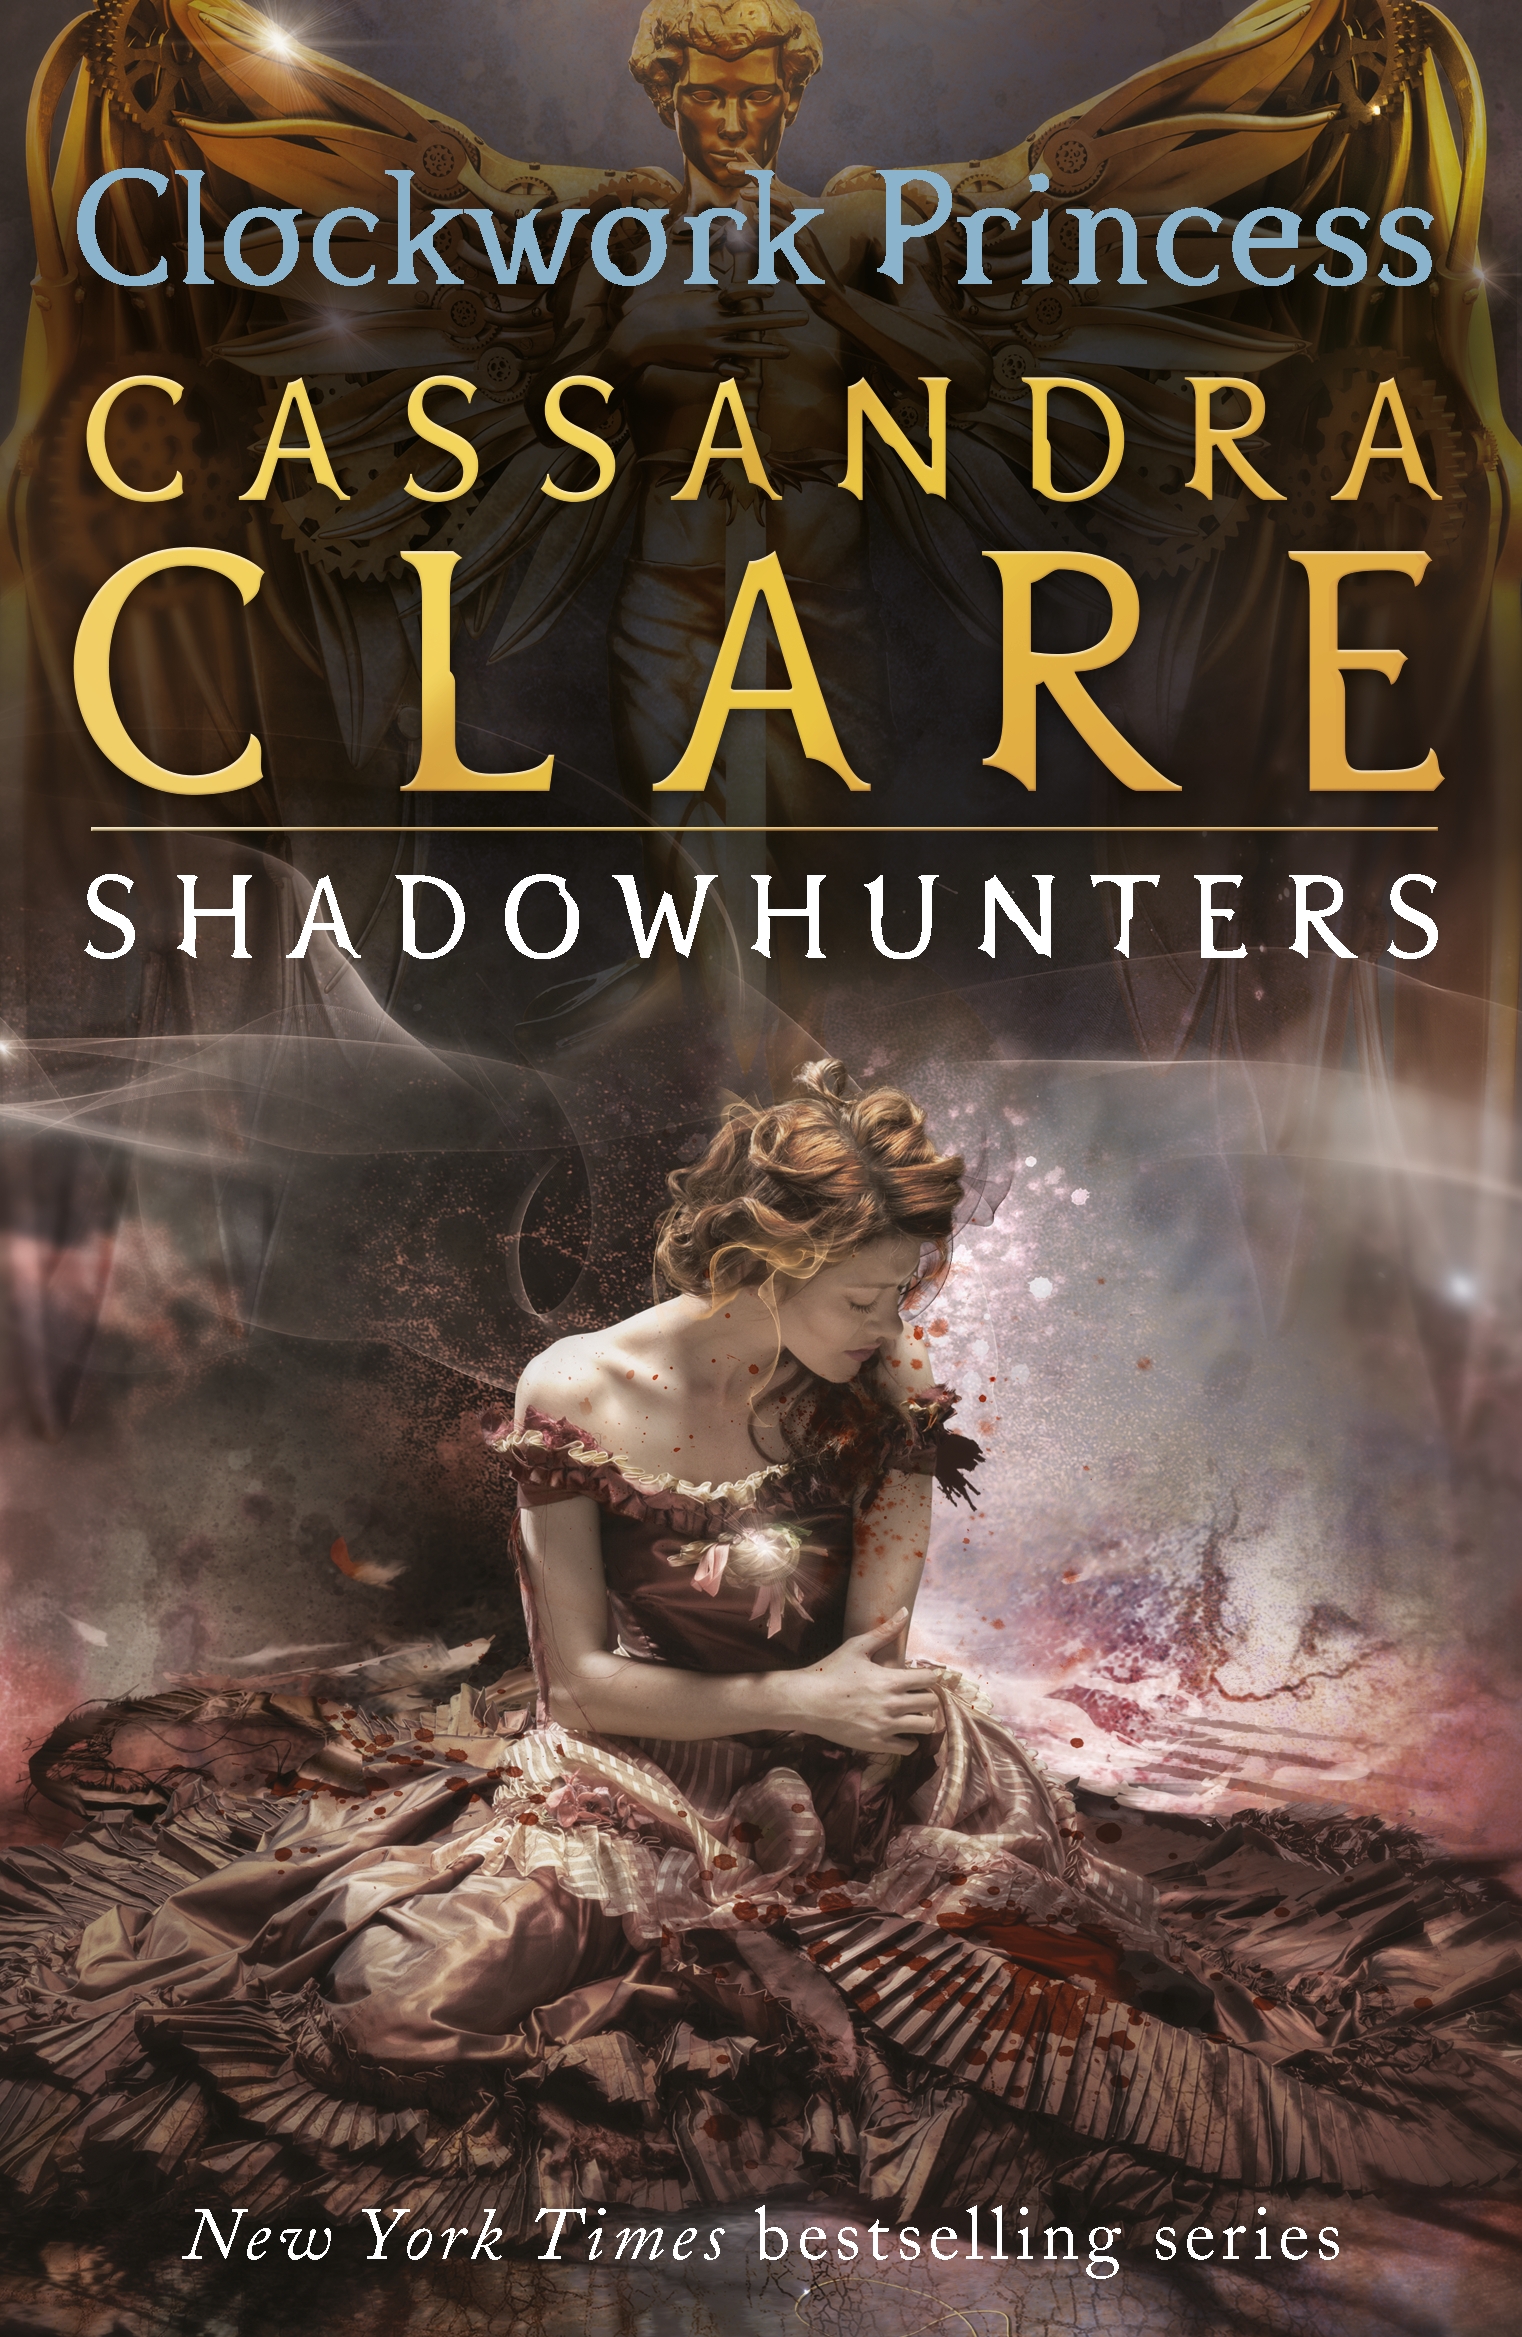 Cassandra Clare is doing a virtual 'Chain of Iron' book tour